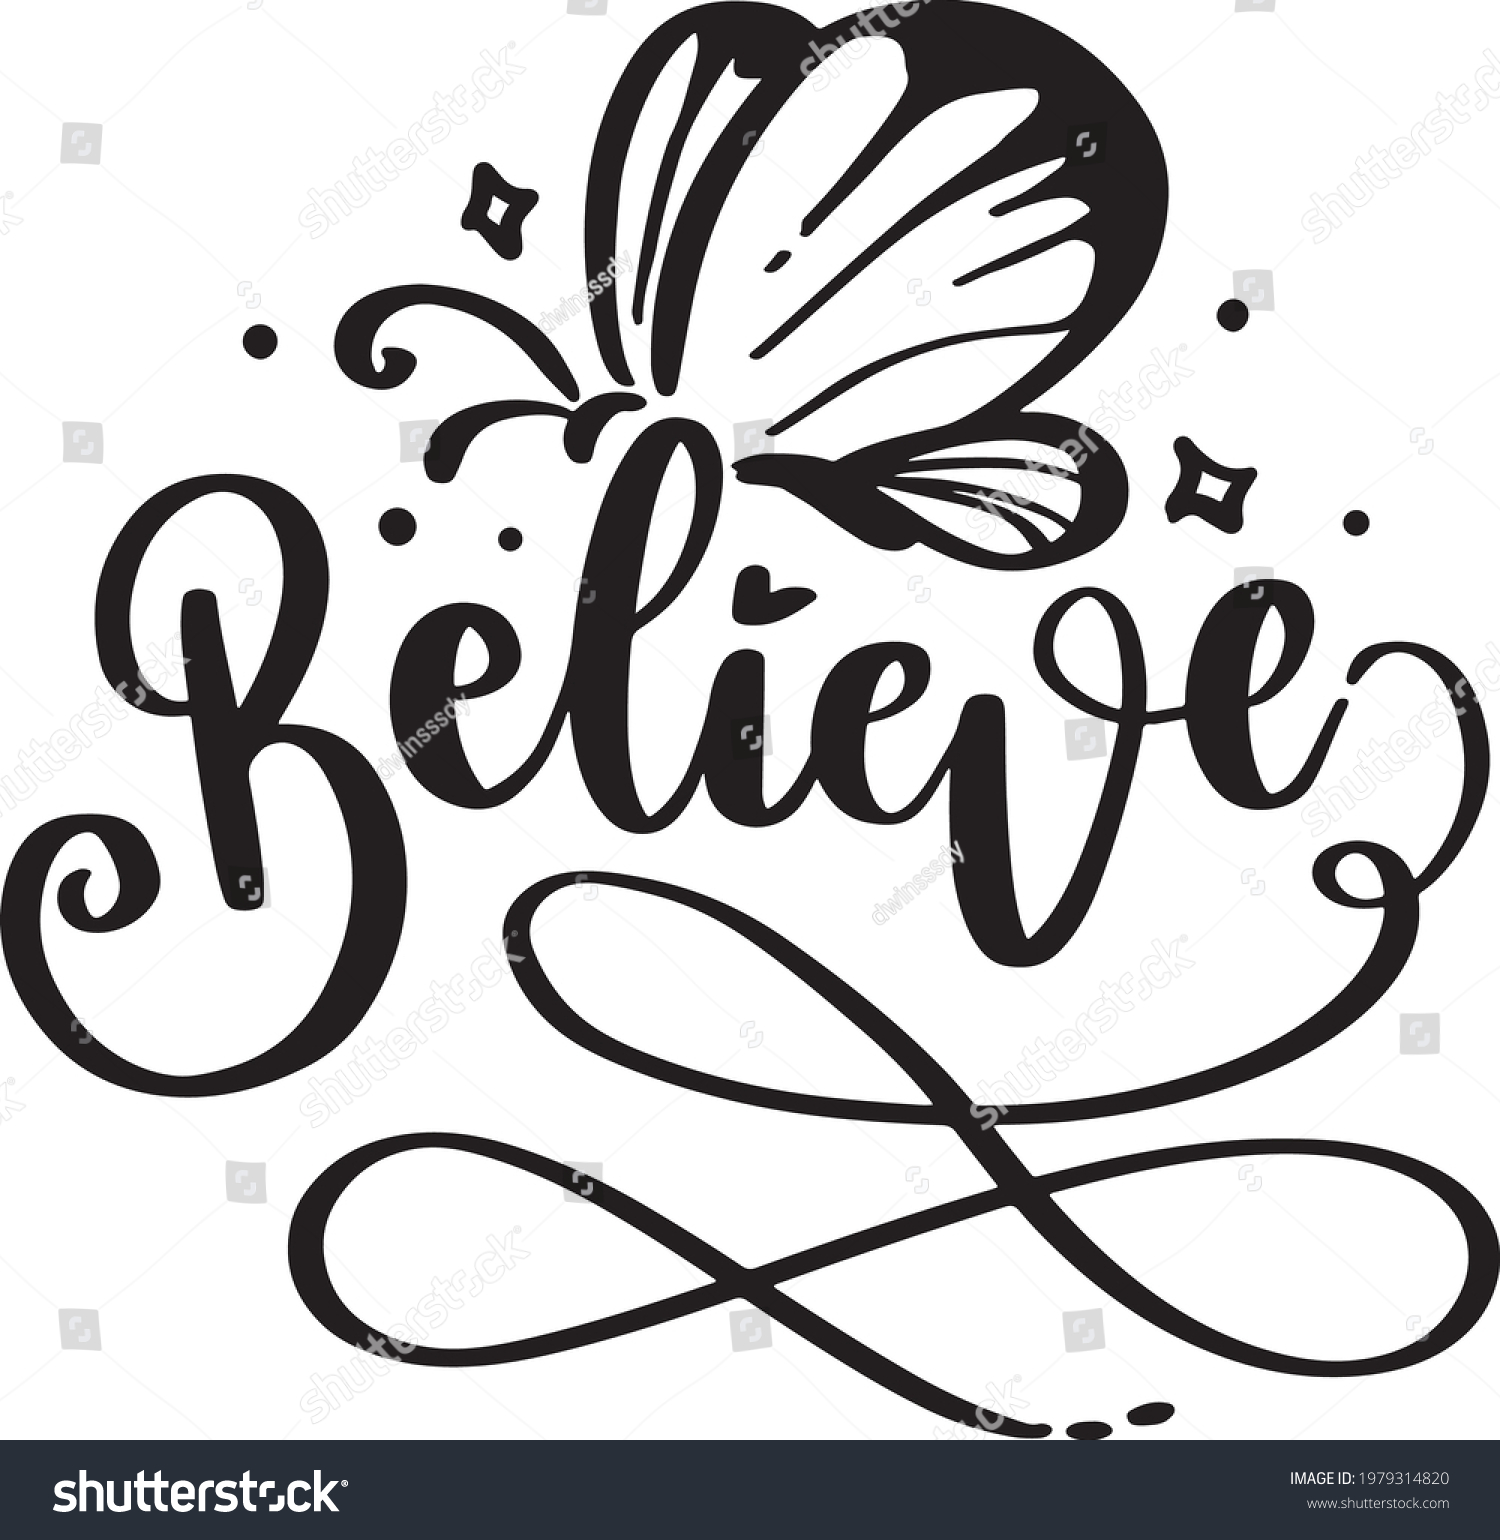 SVG of Believe Motivational Quotes. Inspirational  Lettering Quotes for Poster and T-Shirt Design with Butterfly Illustration svg